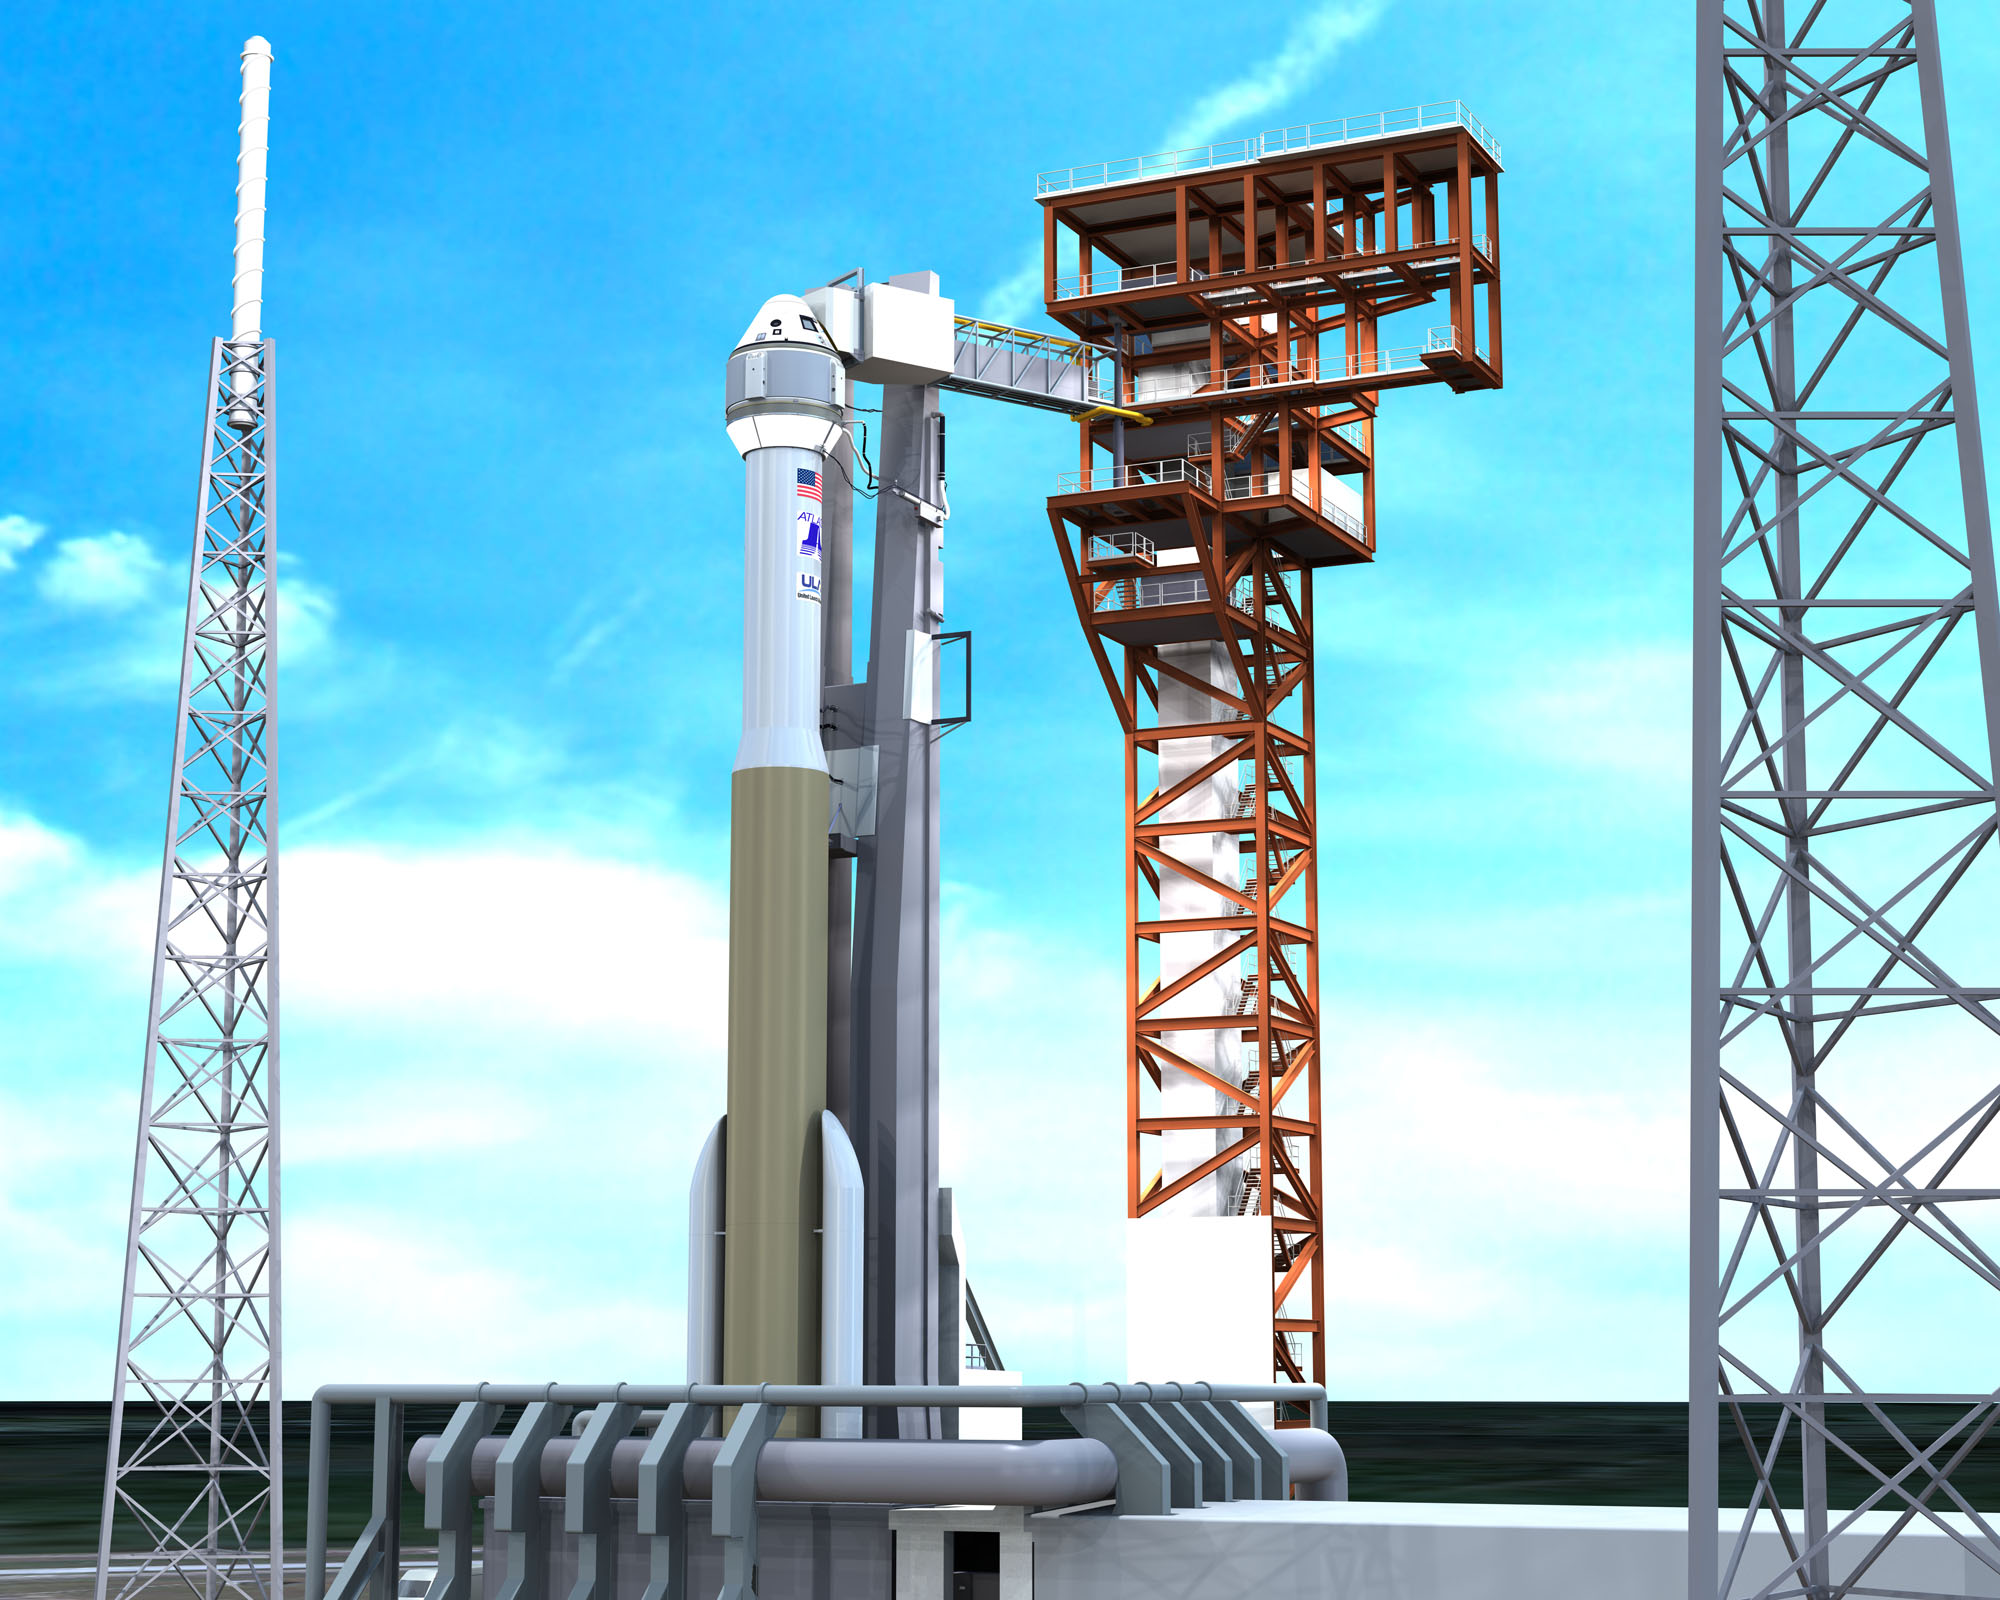 Artist’s concept of Boeing’s CST-100 space taxi atop a man rated ULA Atlas-V rocket showing new crew access tower and arm at Space Launch Complex 41, Cape Canaveral Air Force Station, Fl. Credit: ULA